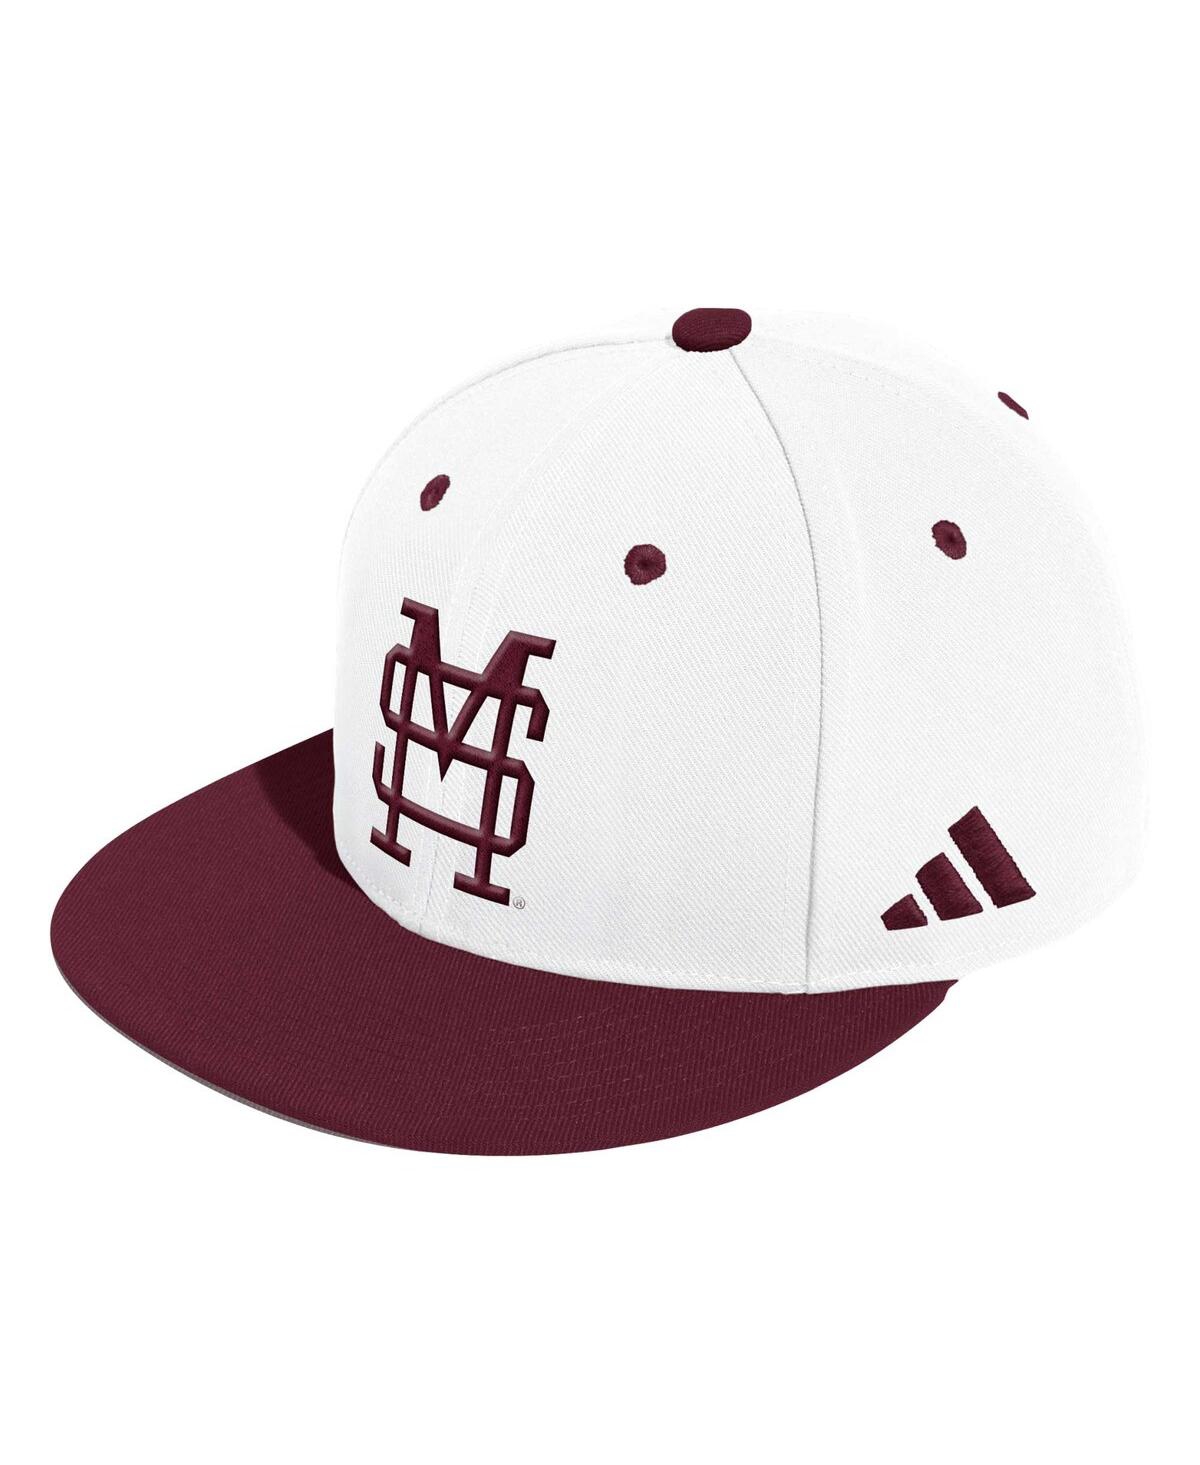 Shop Adidas Originals Men's Adidas White Mississippi State Bulldogs On-field Baseball Fitted Hat